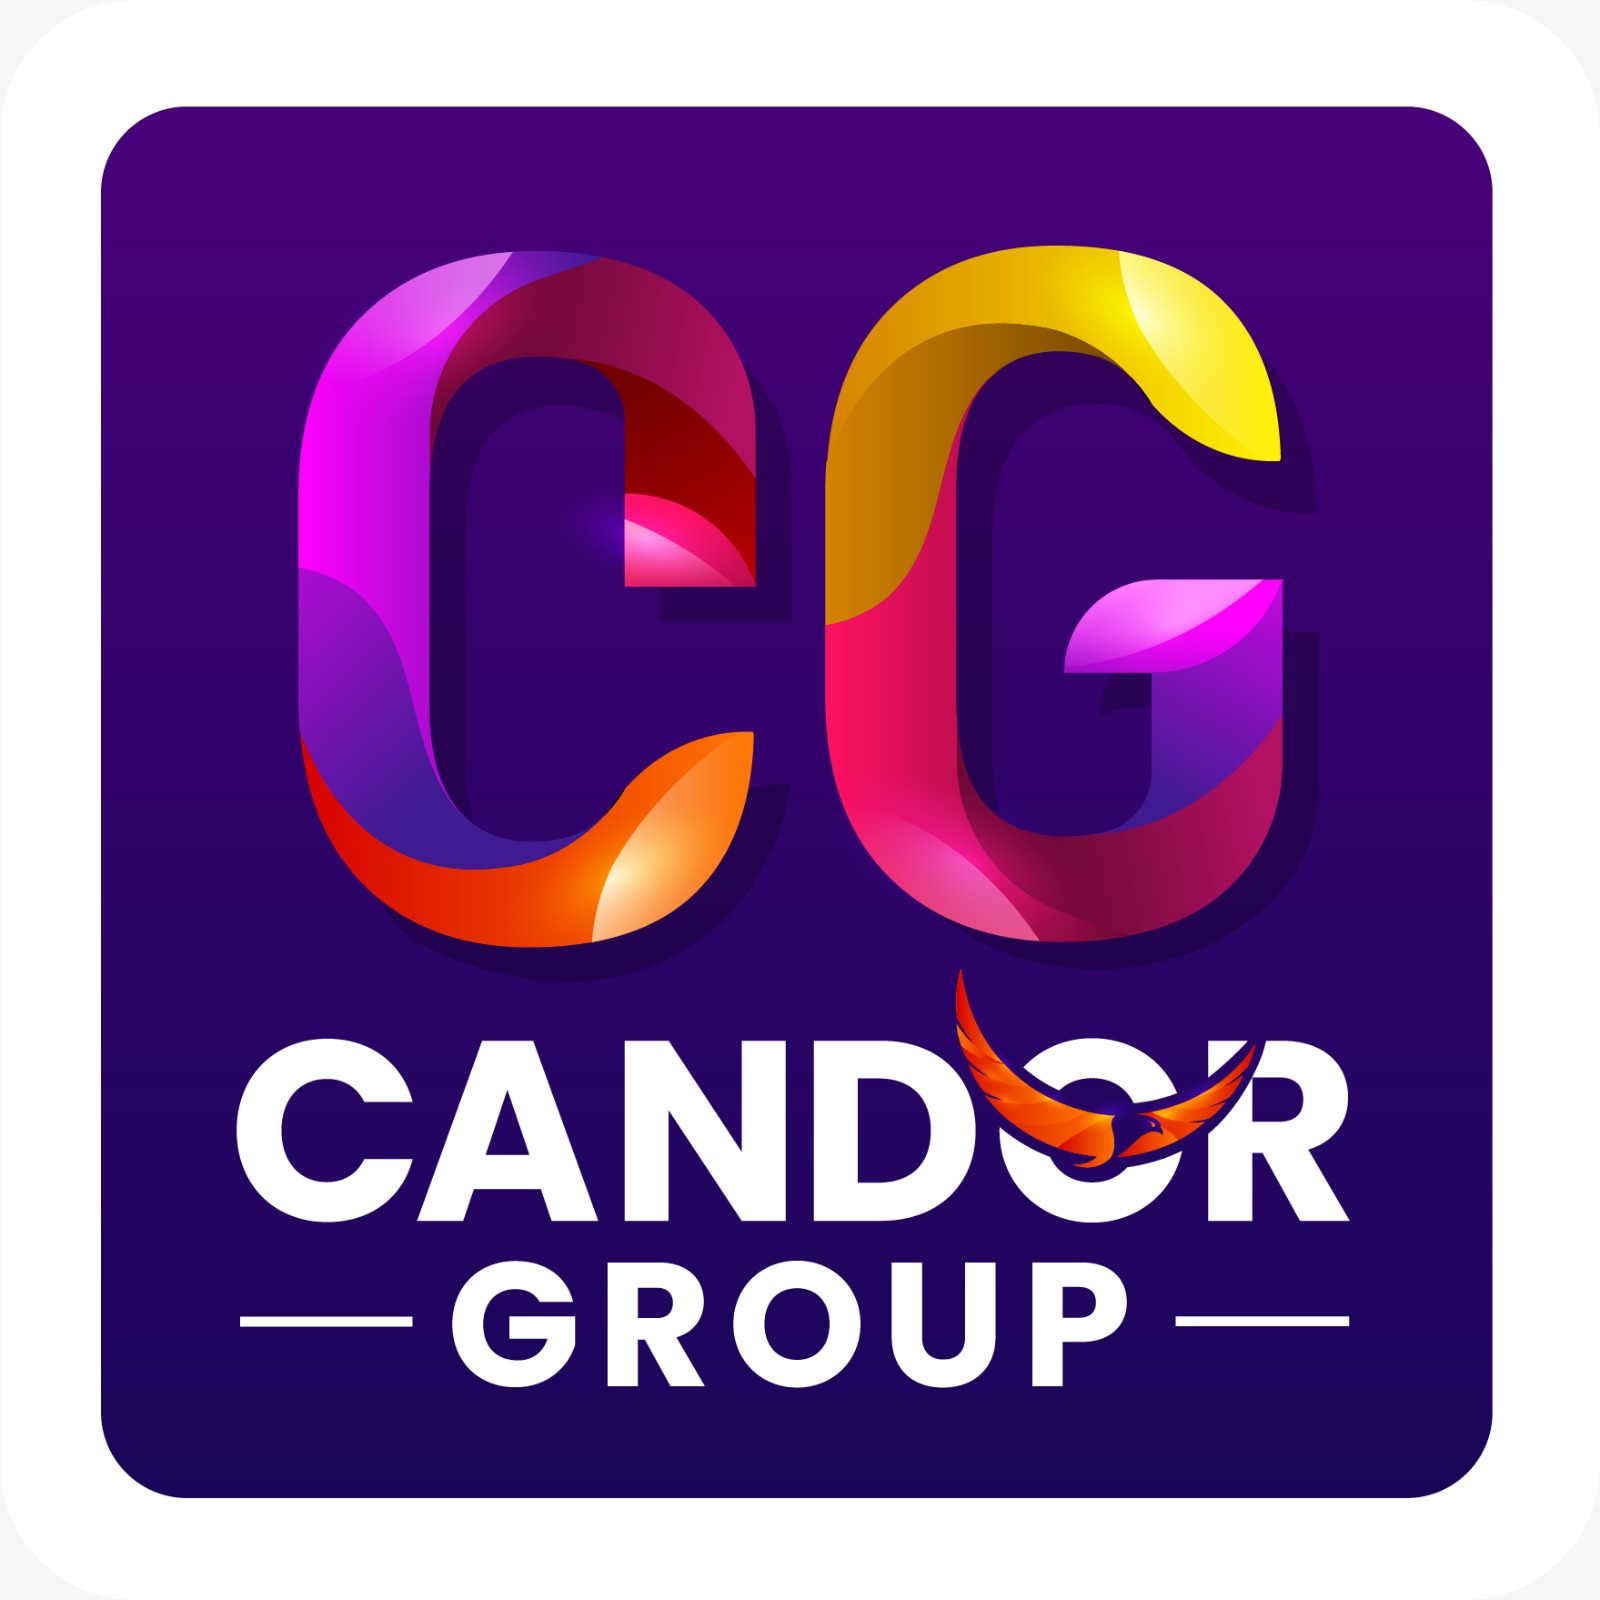 About Candor Groups